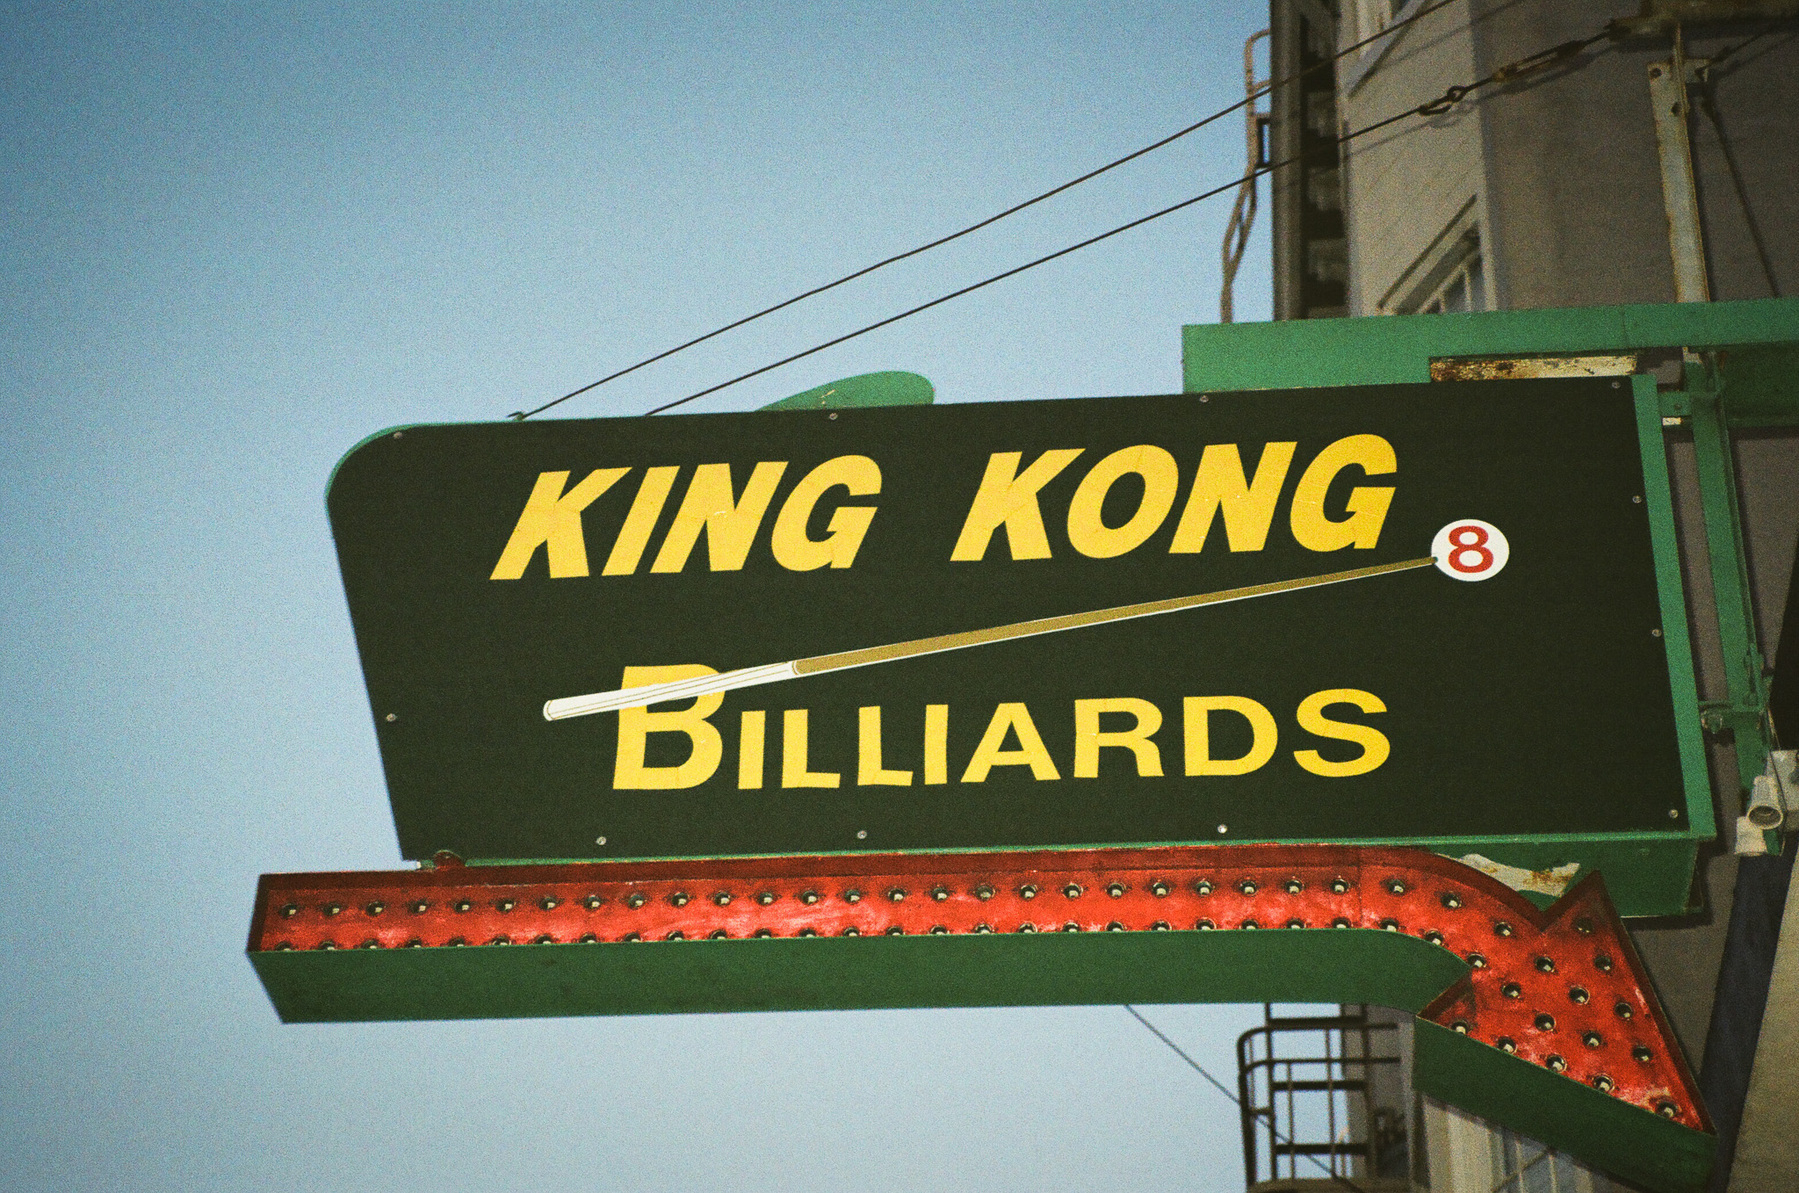 A close up photo of a retro sign that says King Kong Billiards with a large arrow